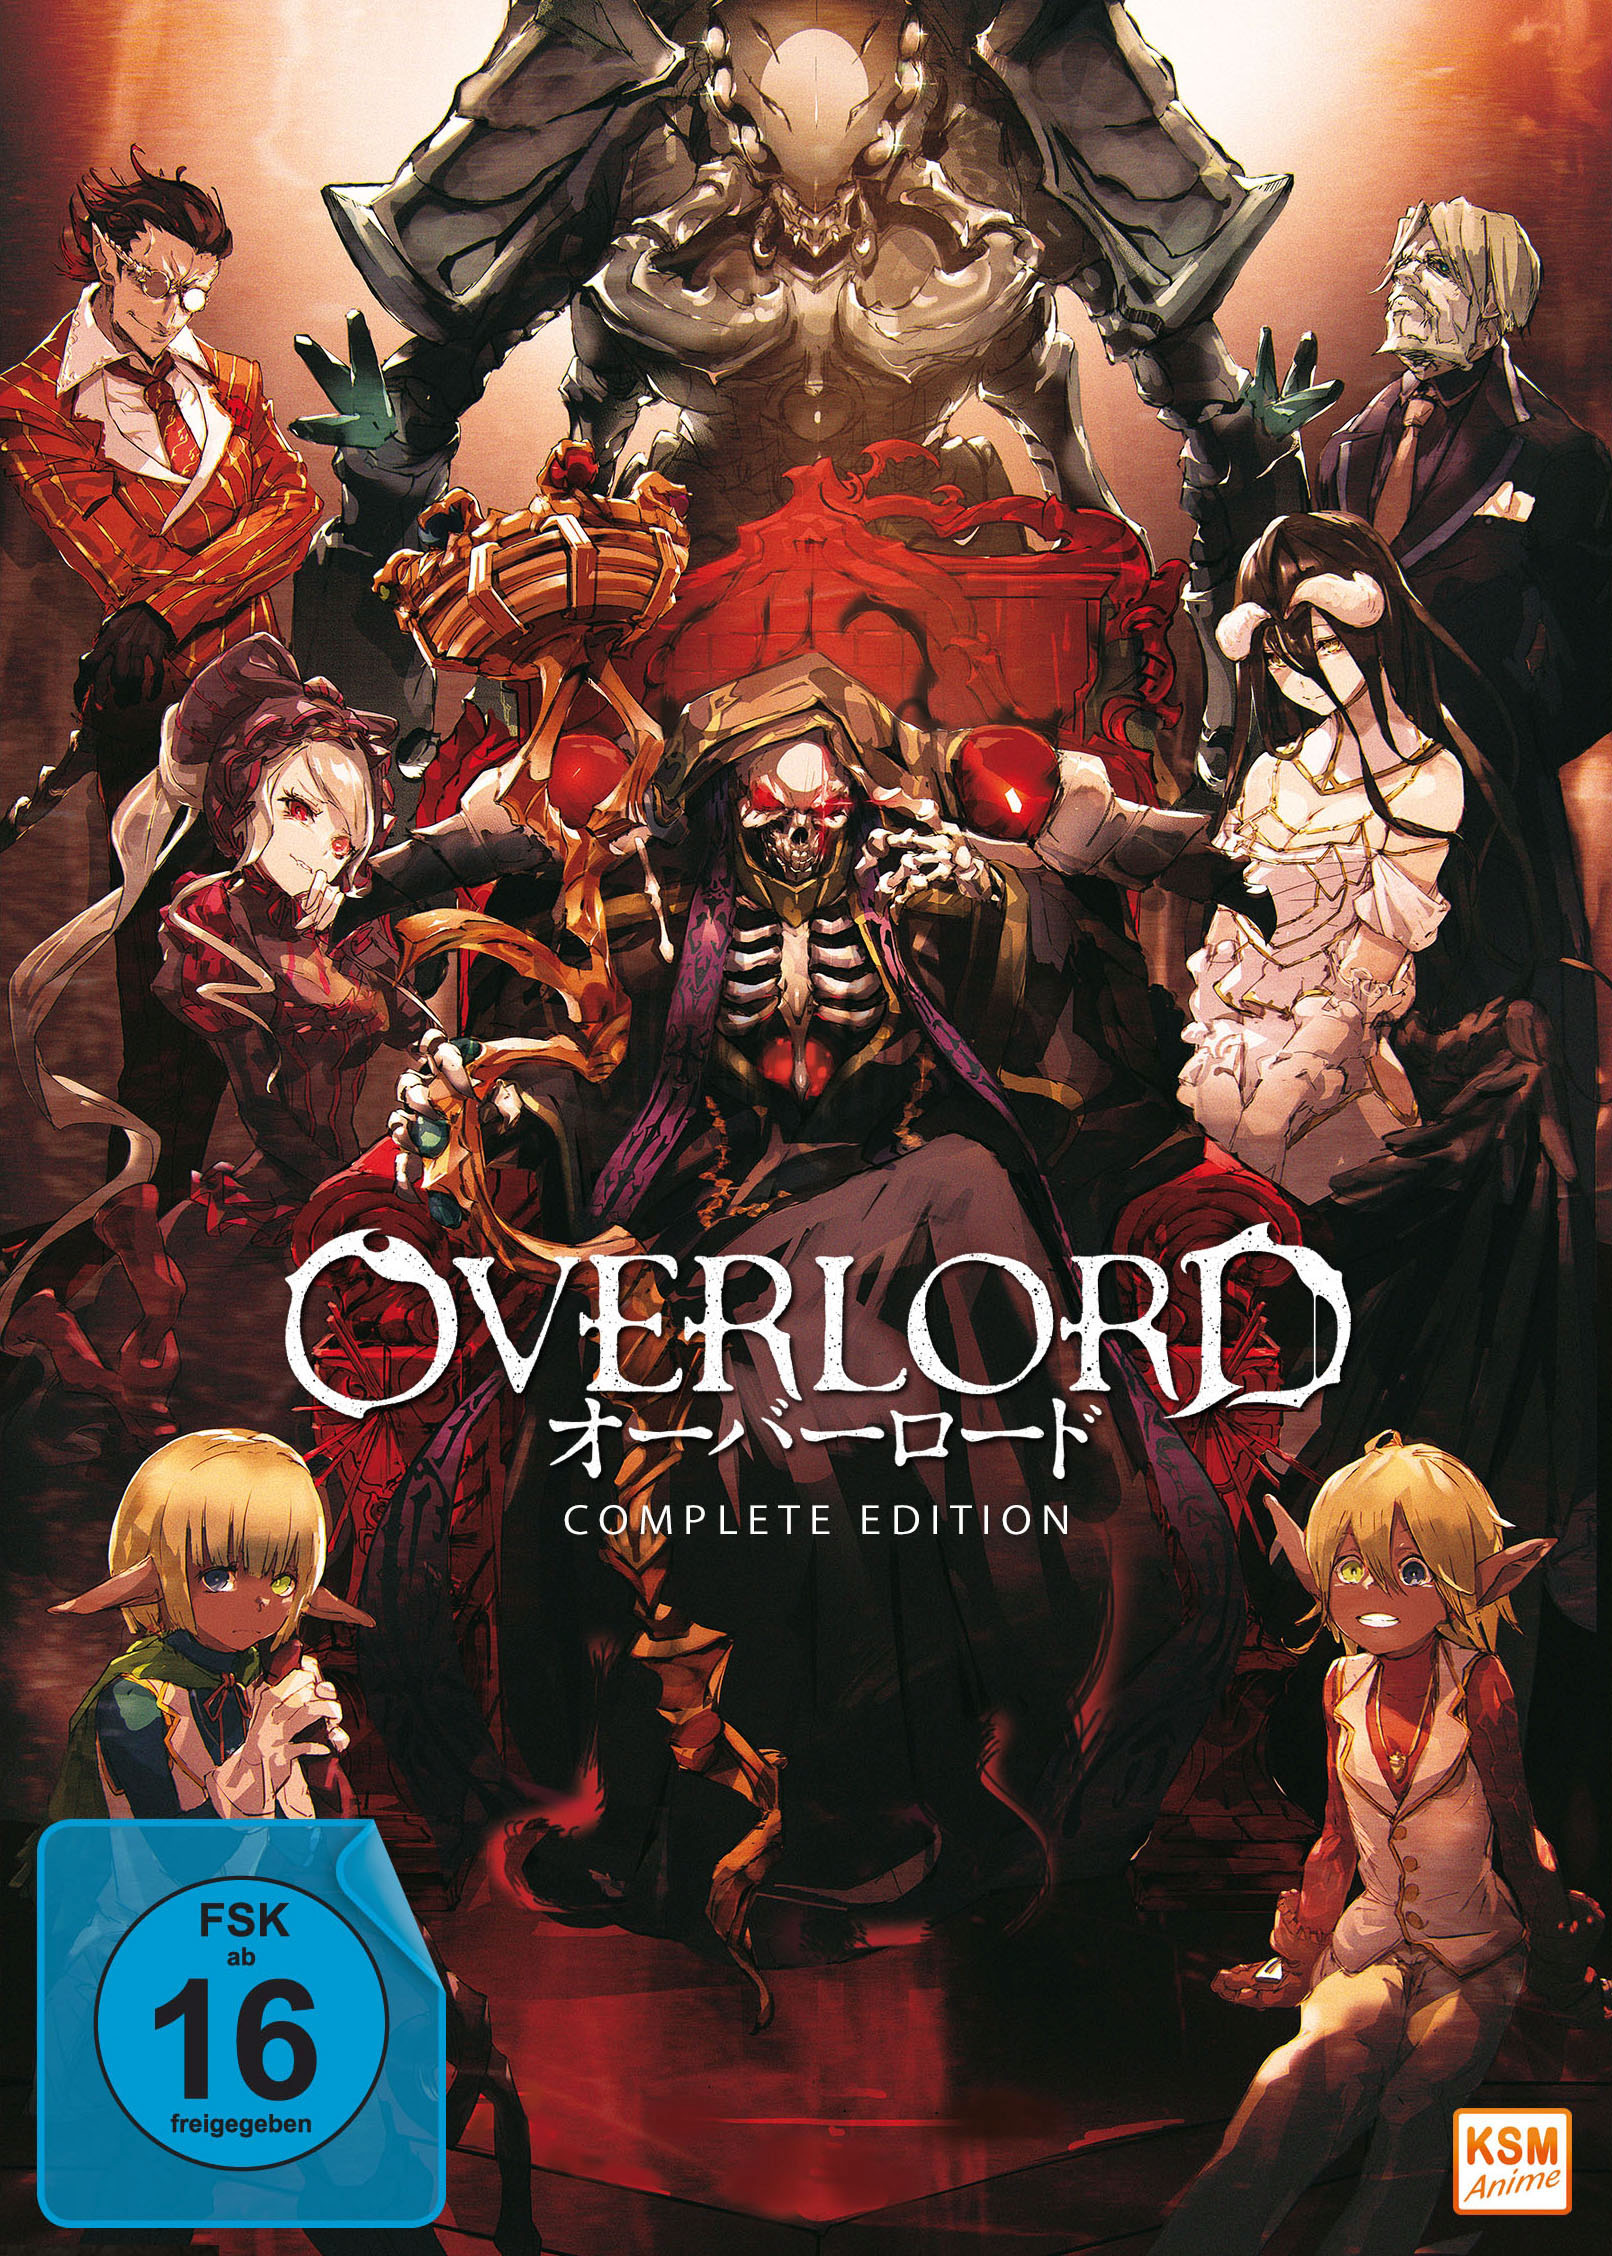 Episoden) Overlord Edition DVD (13 Complete -